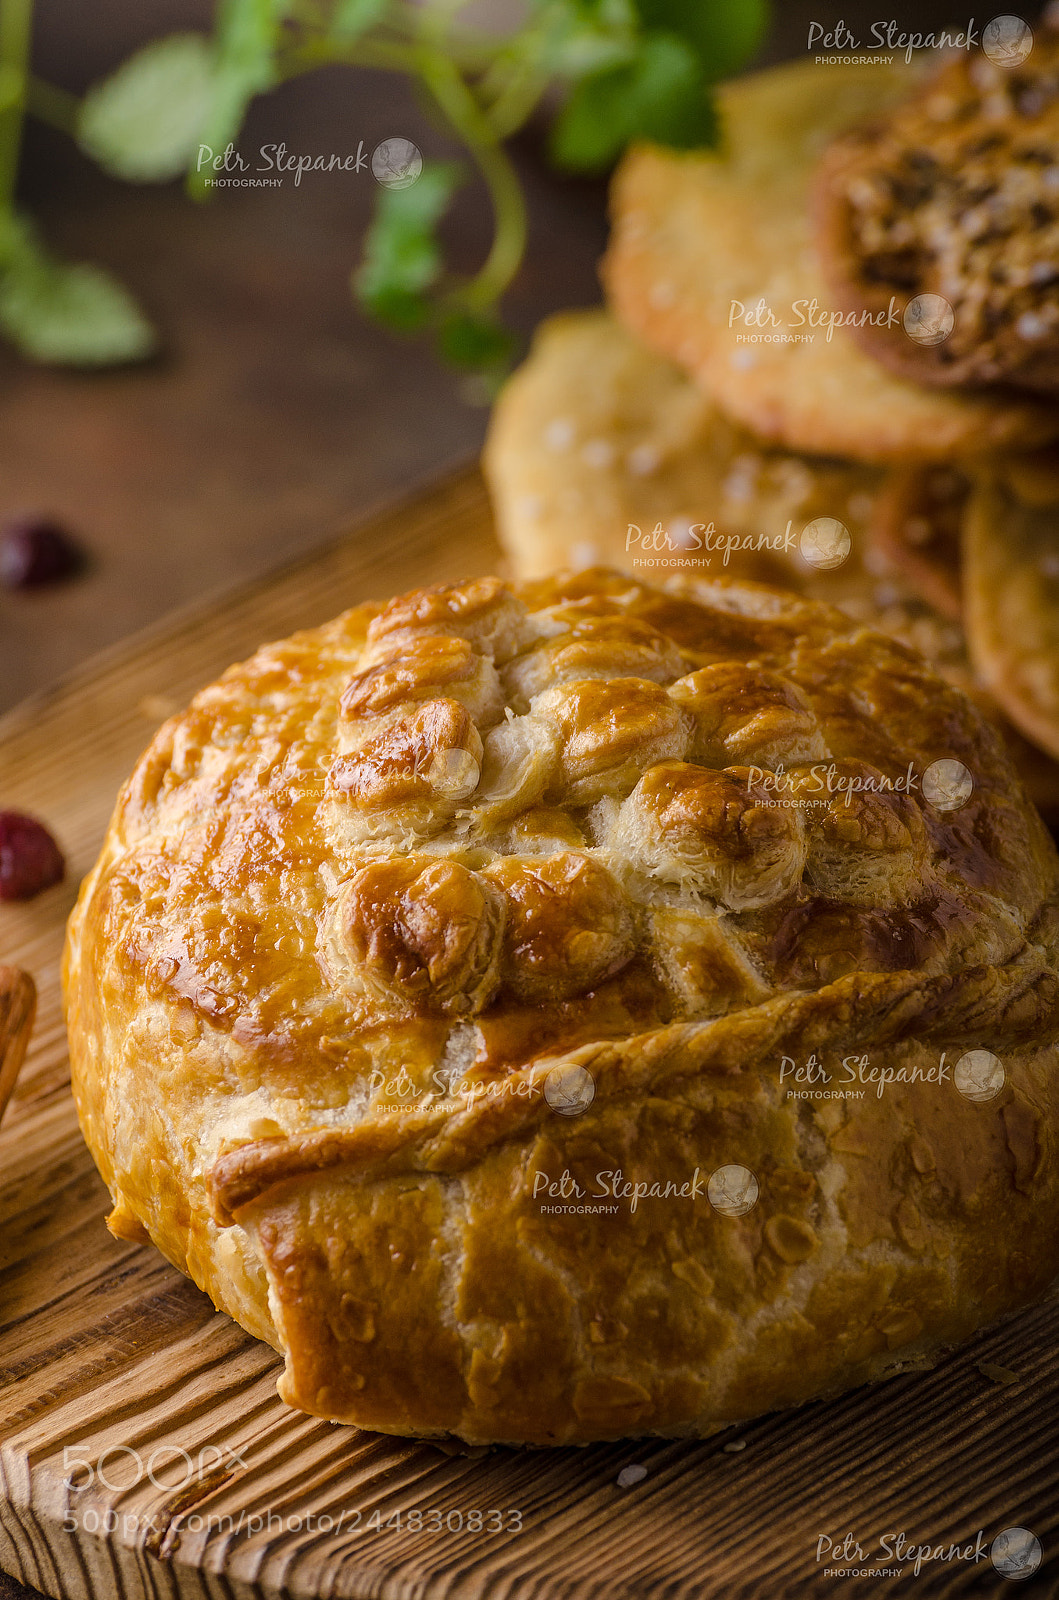 Nikon D7000 sample photo. Puff pastry stuffed by photography